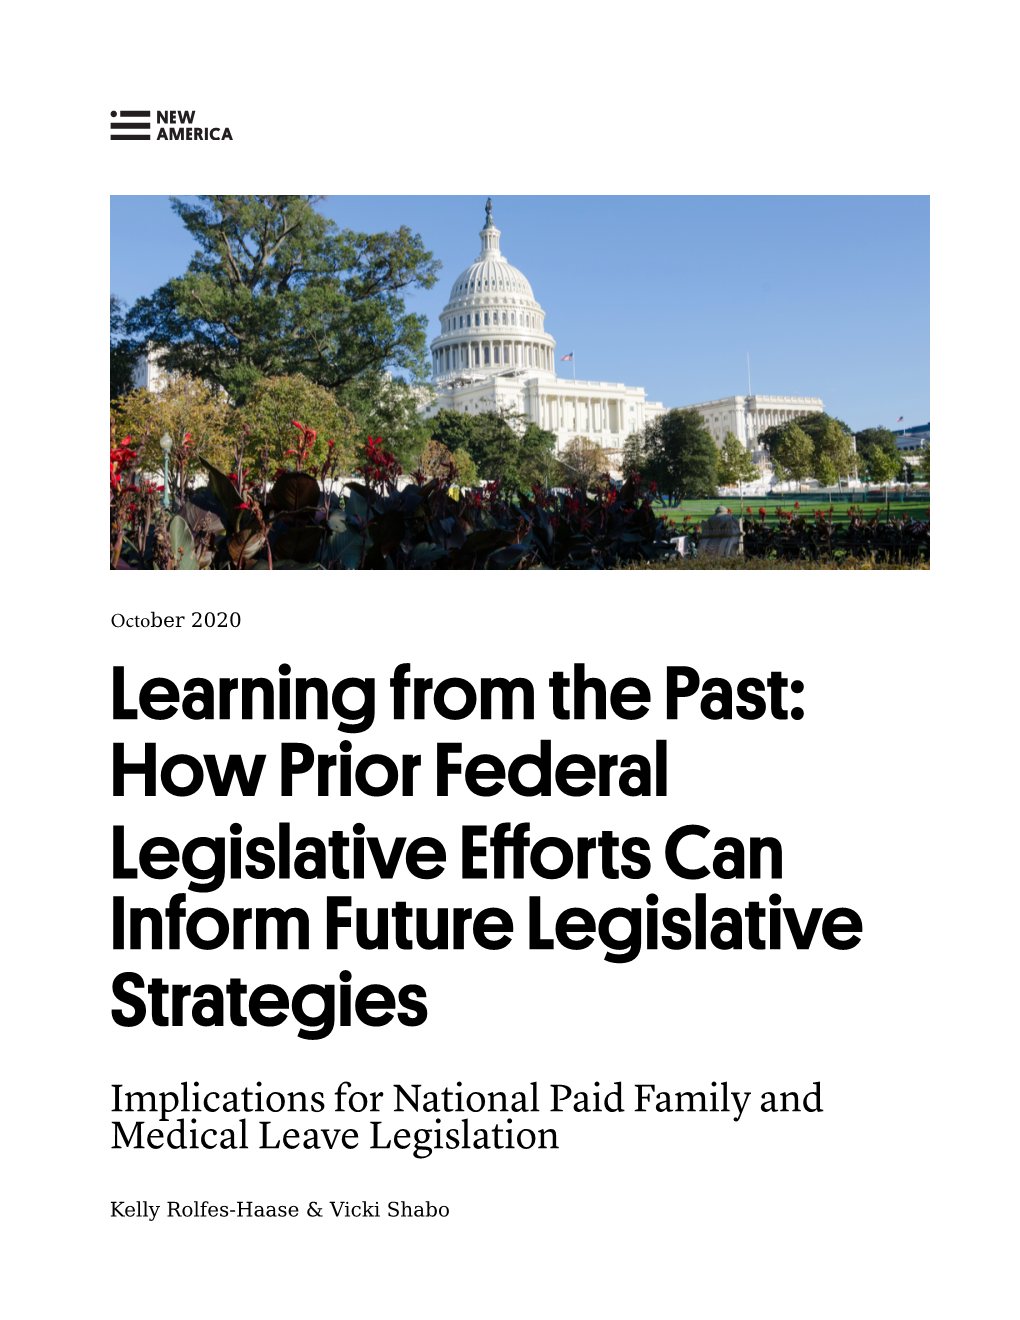 Learning from the Past: How Prior Federal Legislative Efforts Can